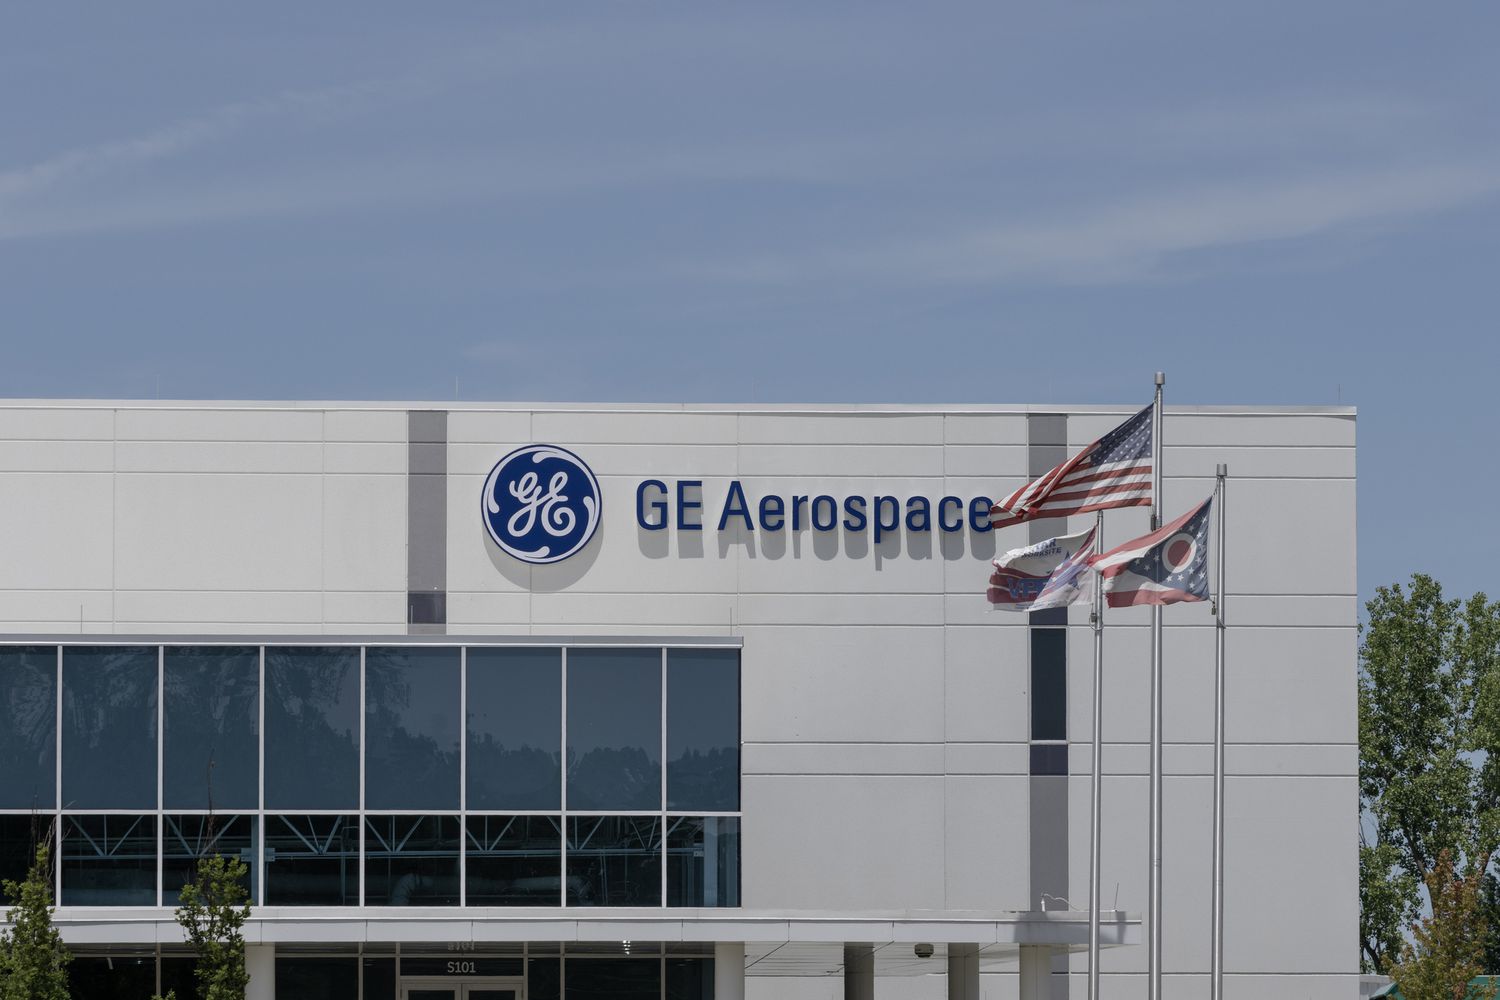 GE Aerospace Stock Jumps on Earnings Beat, Guidance Boost [Video]